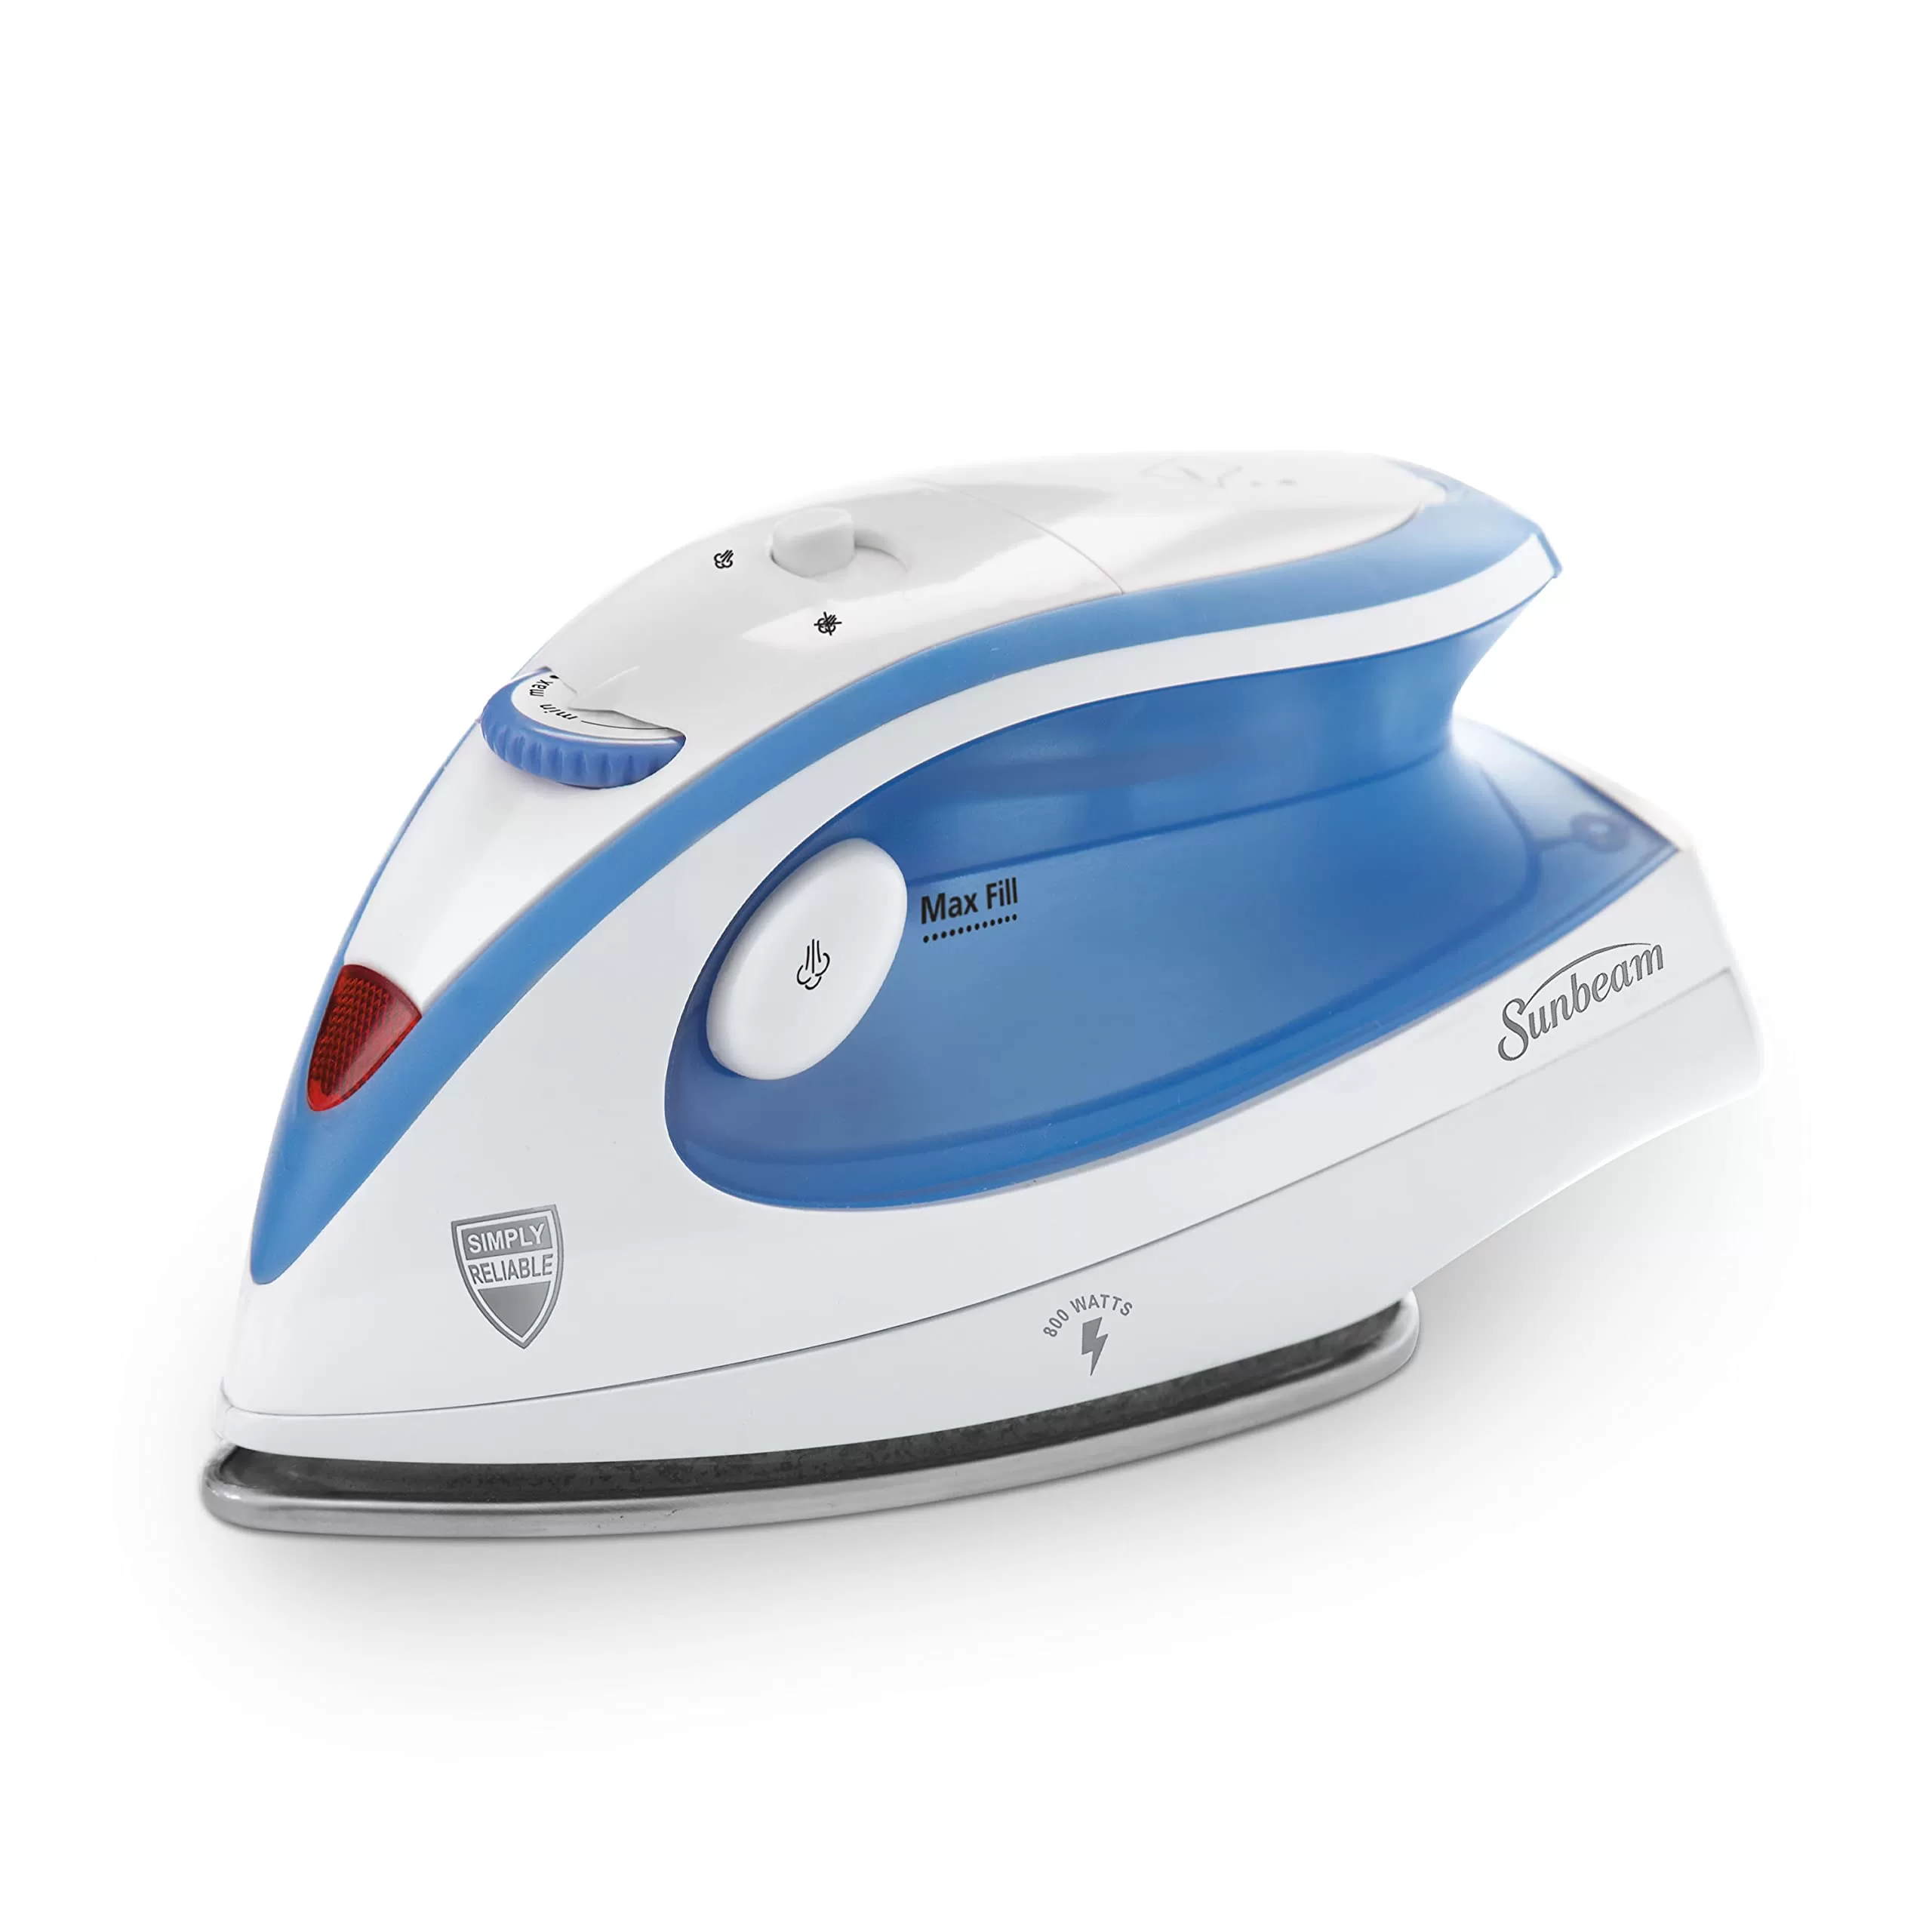 travel iron for camping